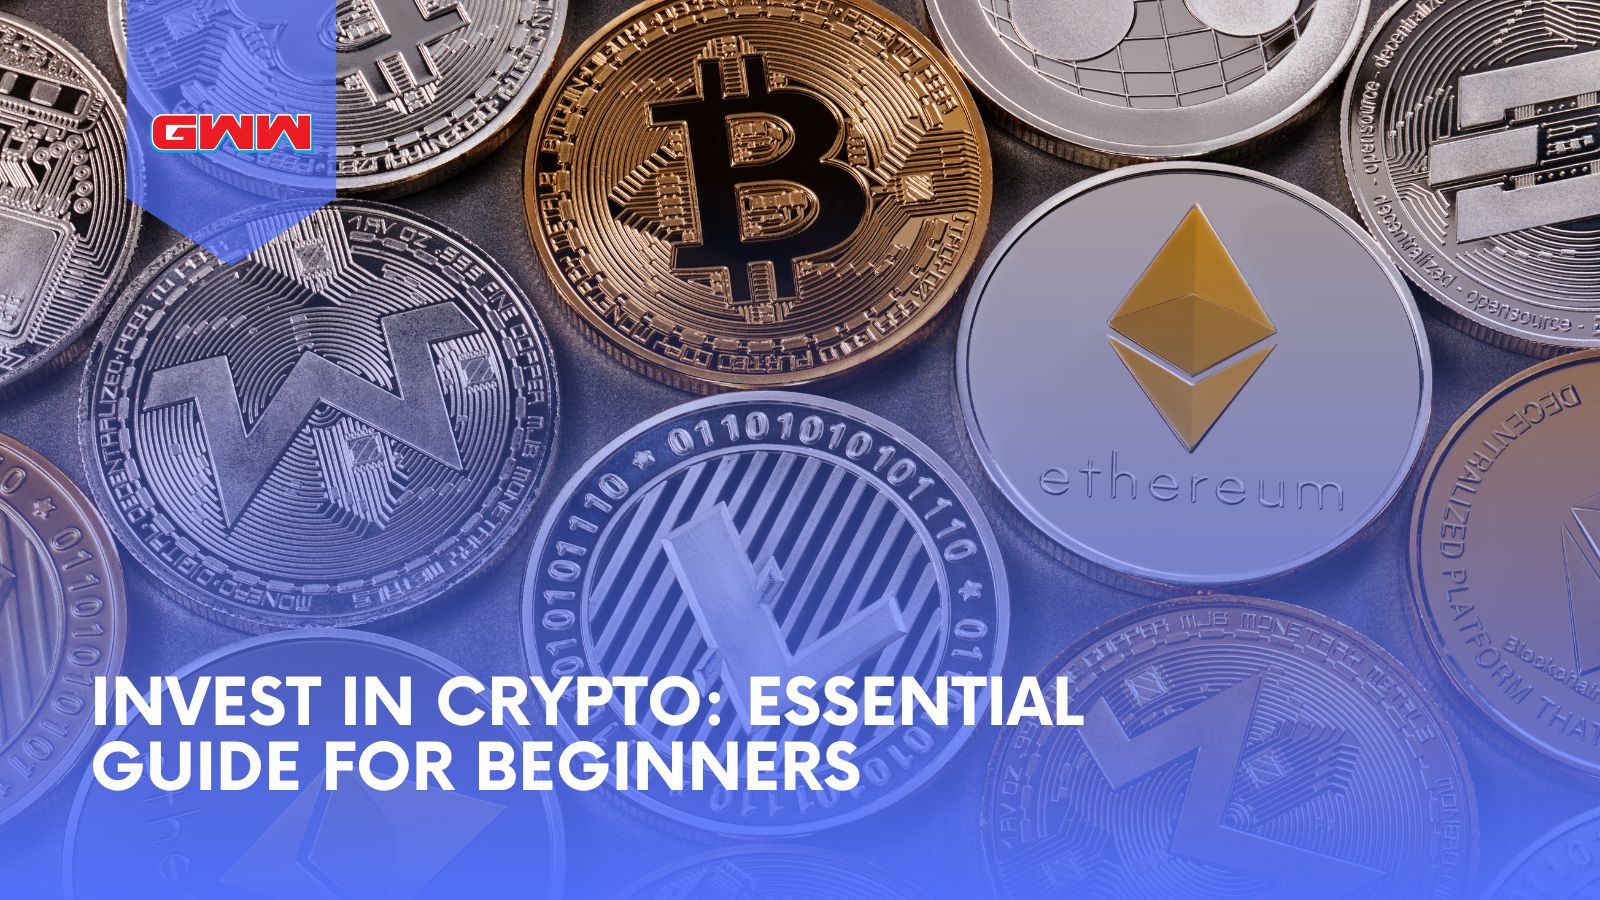 Invest in Crypto: Essential Guide for Beginners